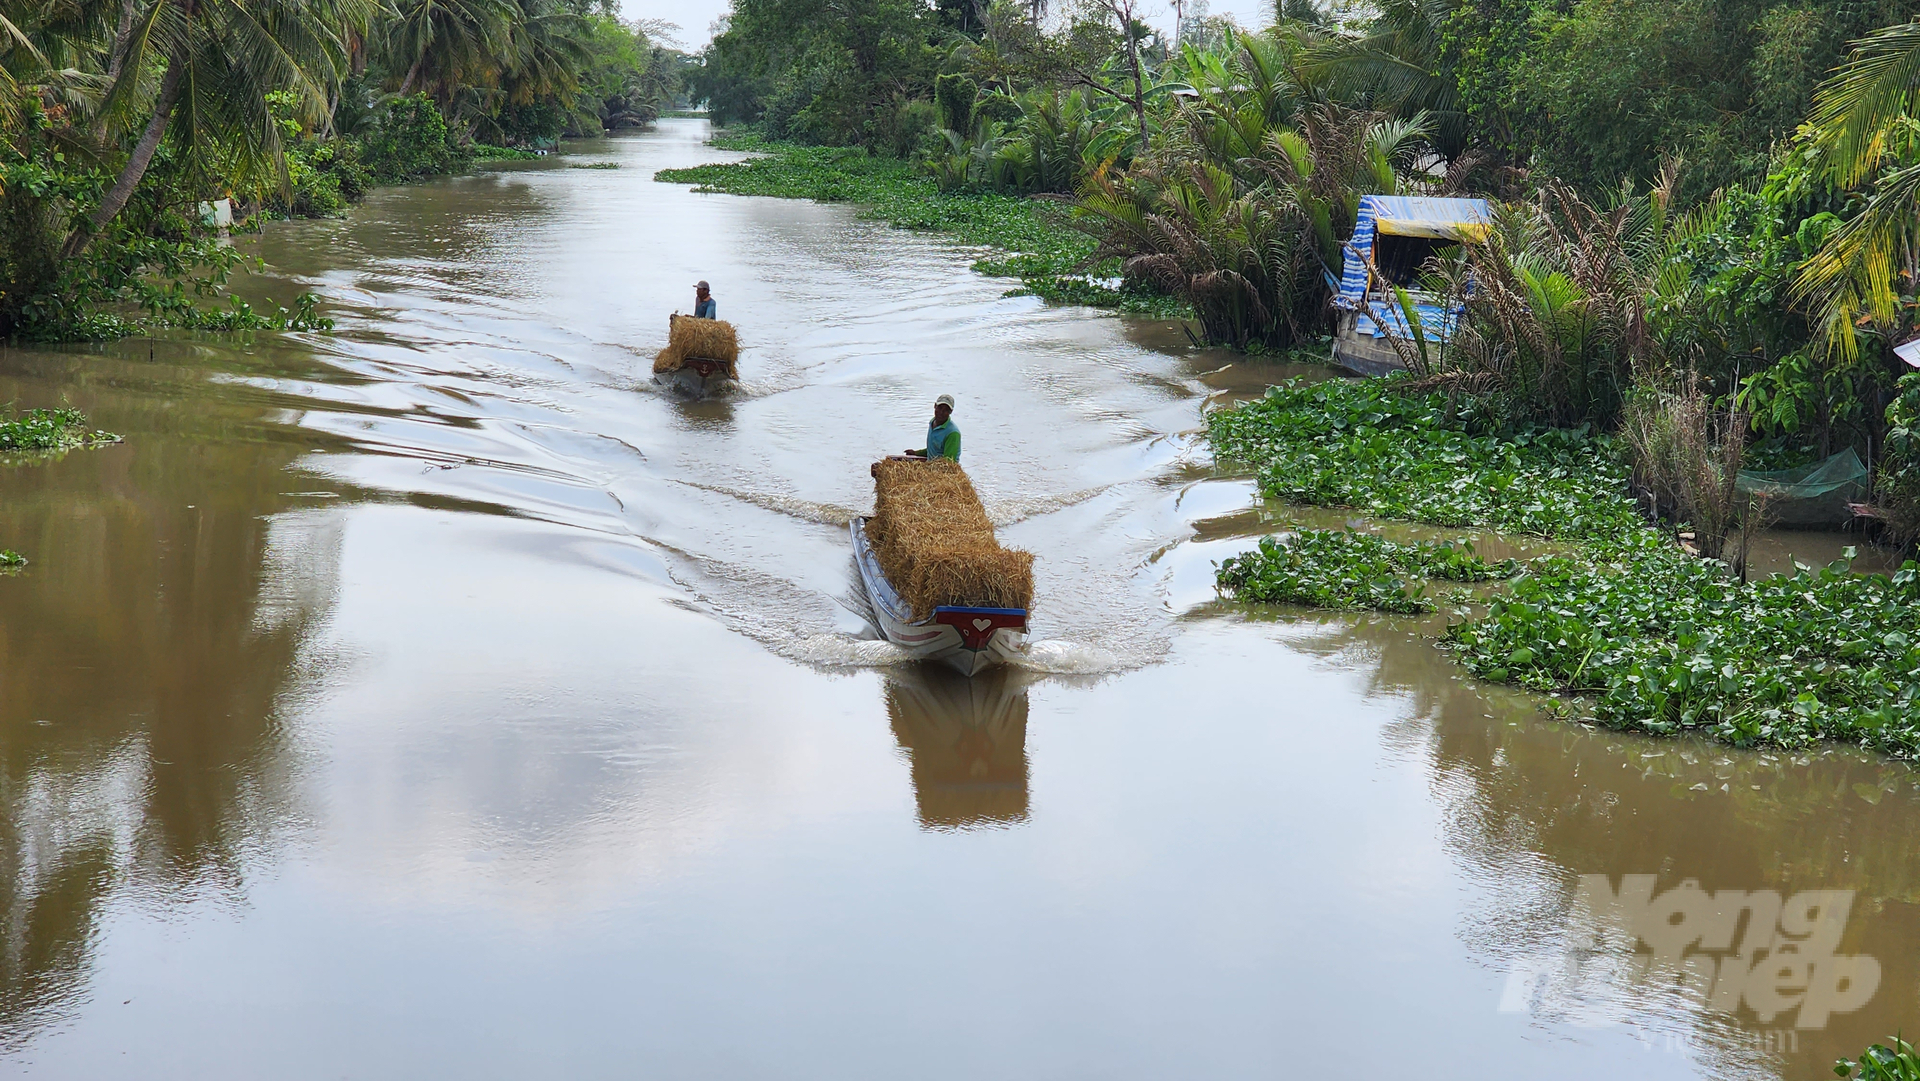 The waterway has become an important transportation system to promote economic development for the people of the Mekong Delta. Photo: Kim Anh.